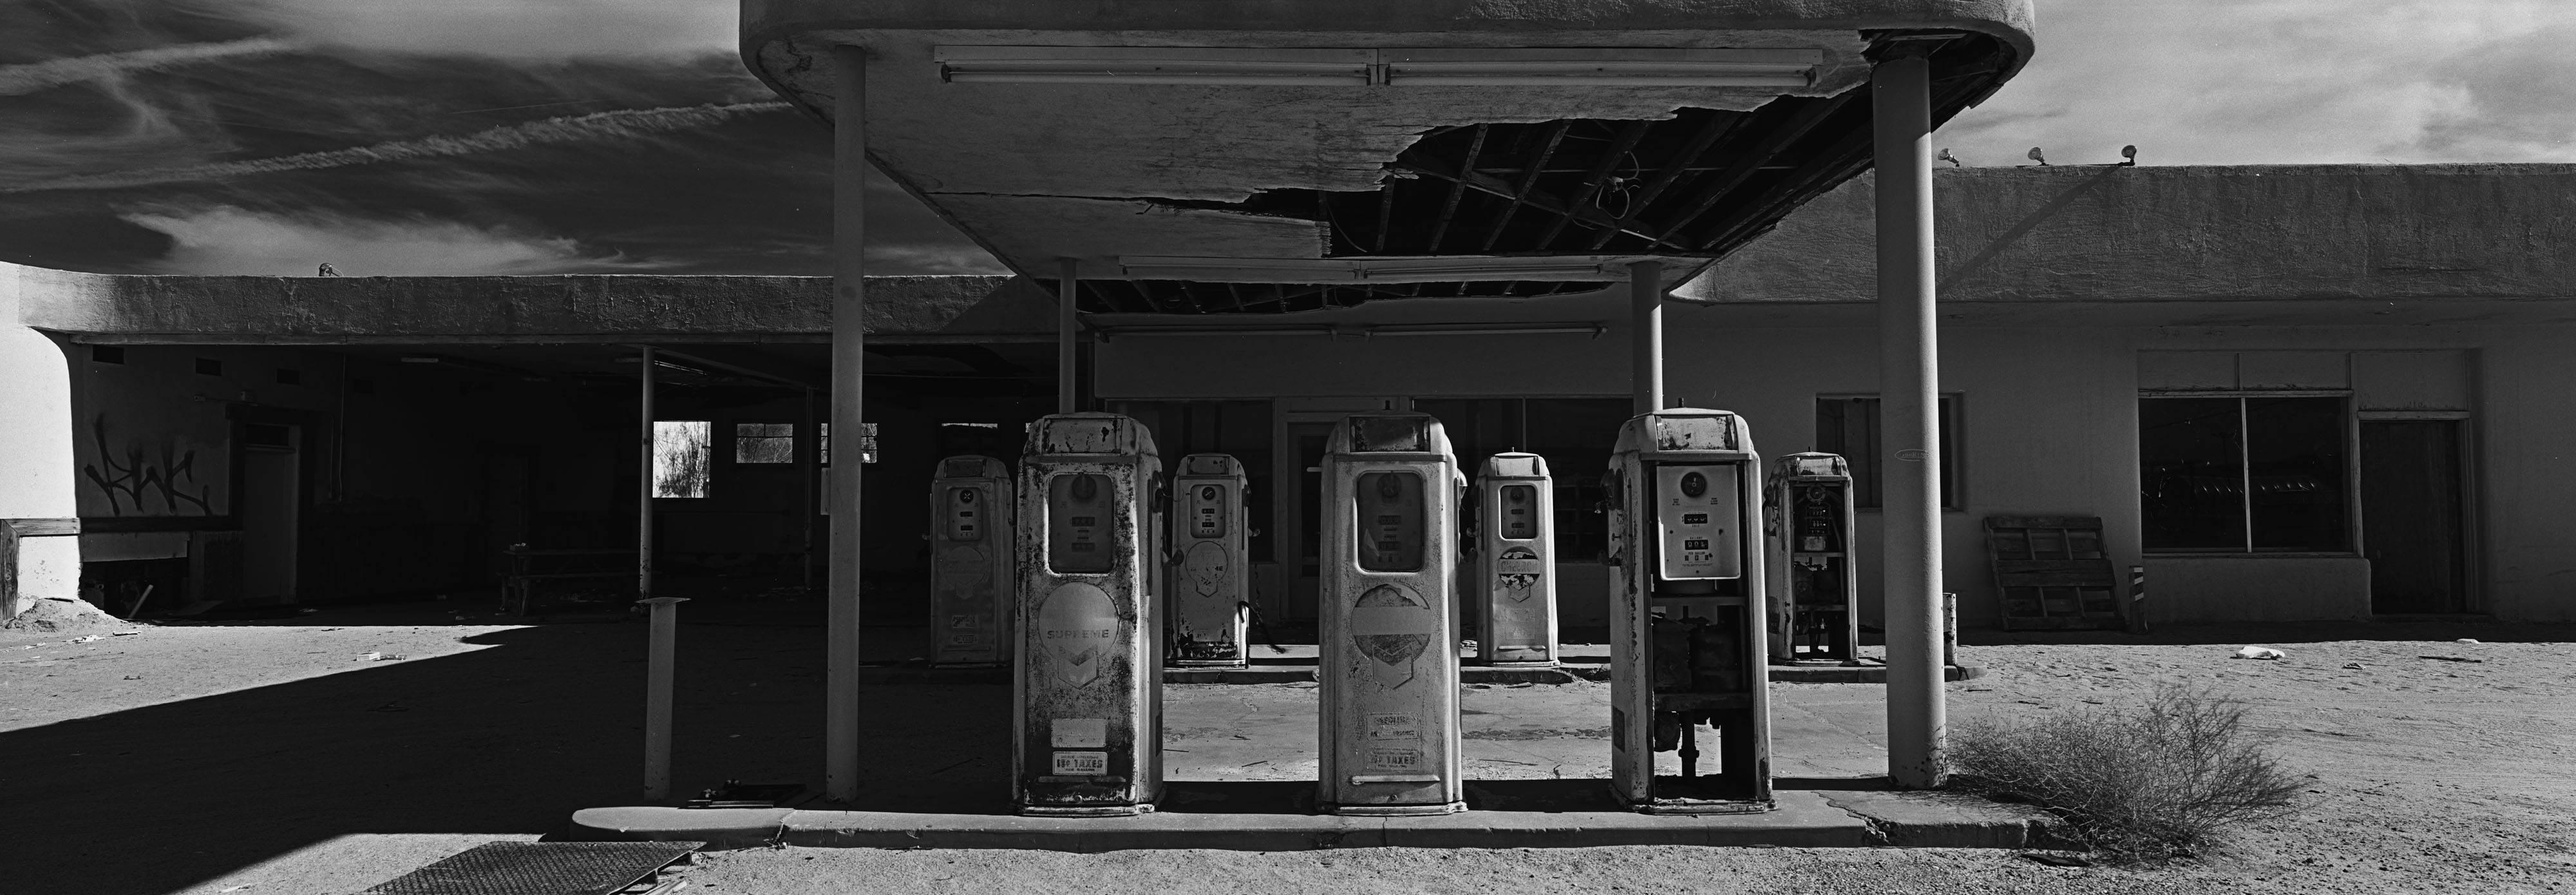 Cody S. Brothers Black and White Photograph - Landscape Photography Panoramic Series: 'Gas Pumps'